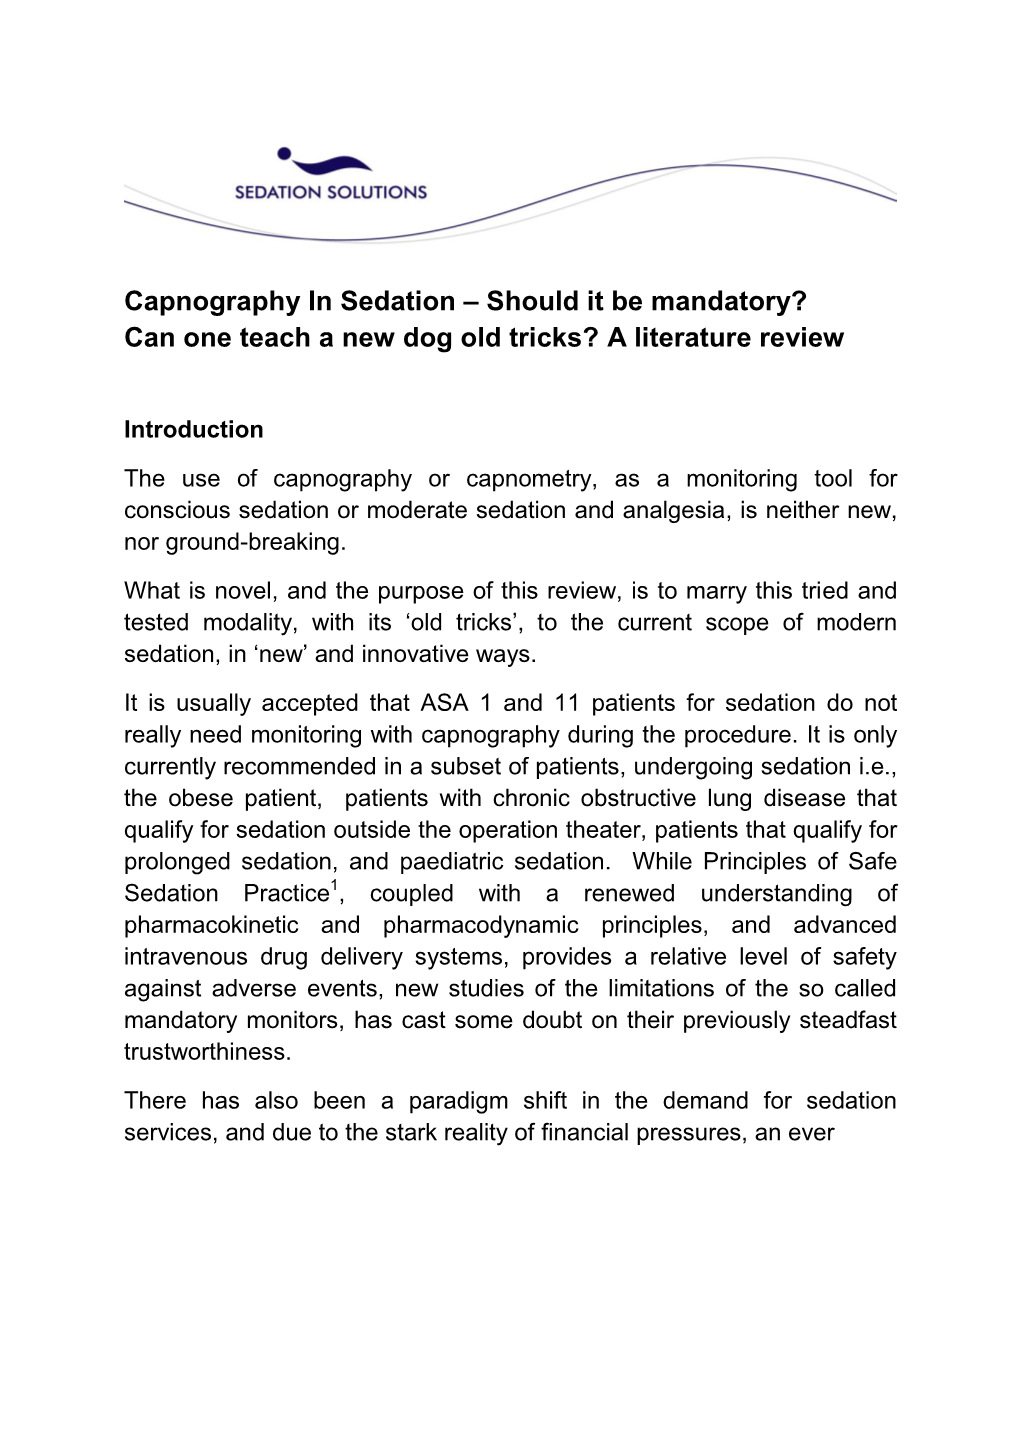 Capnography in Sedation – Should It Be Mandatory? Can One Teach a New Dog Old Tricks? a Literature Review